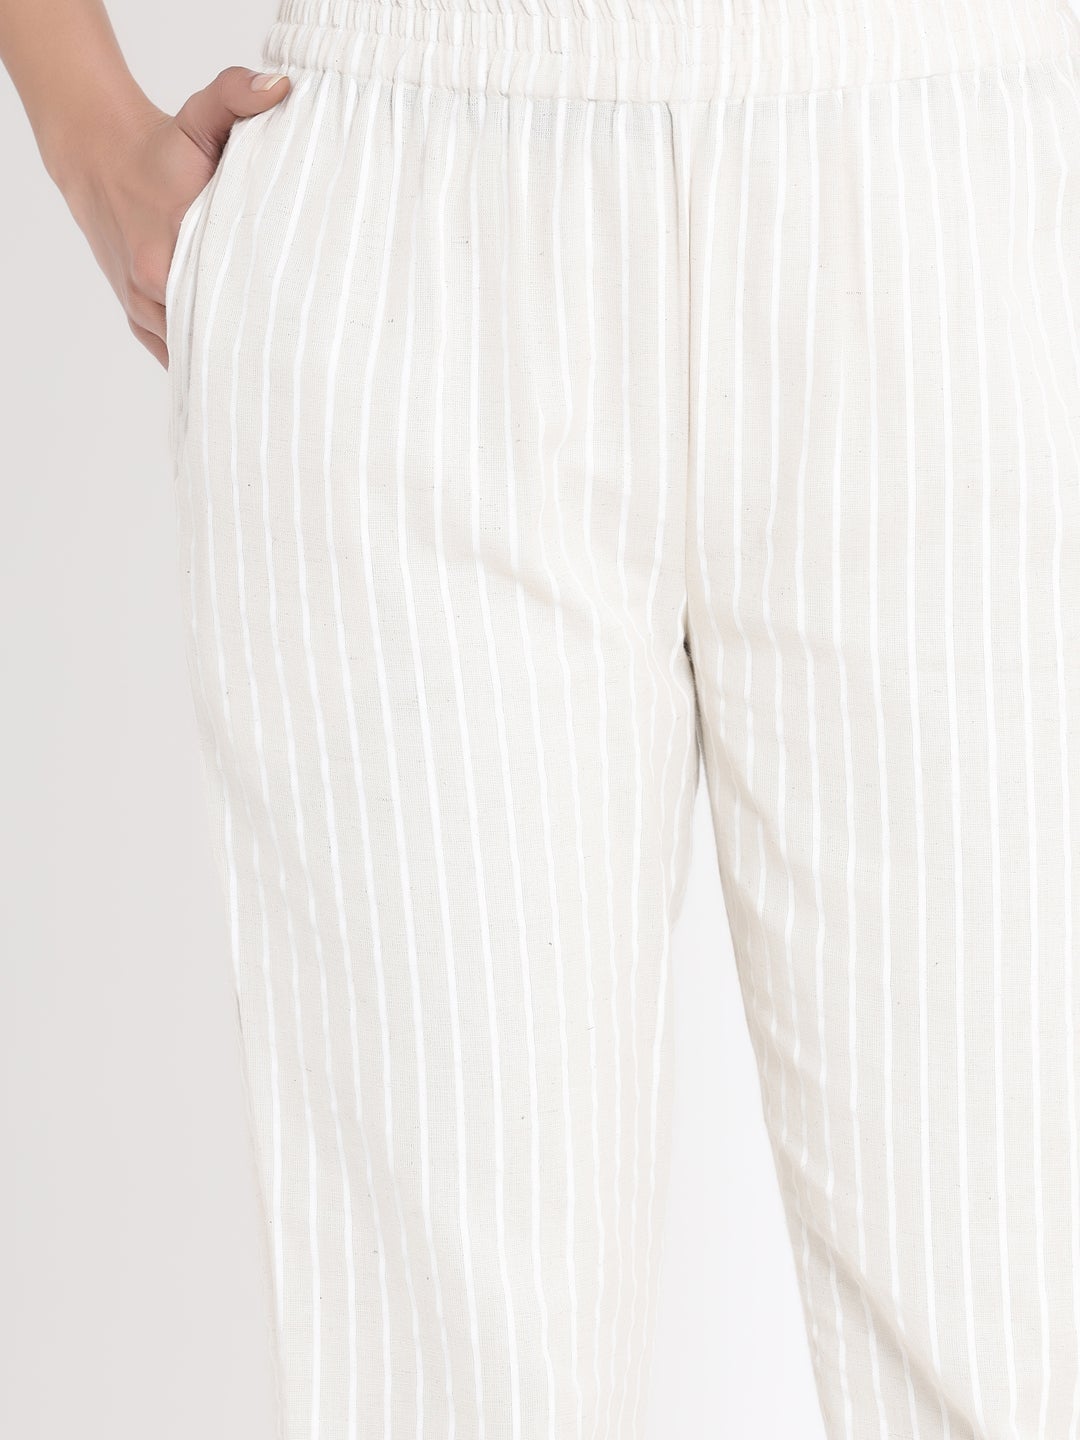 Striped Pants For Women - Buy Striped Pants For Women online in India